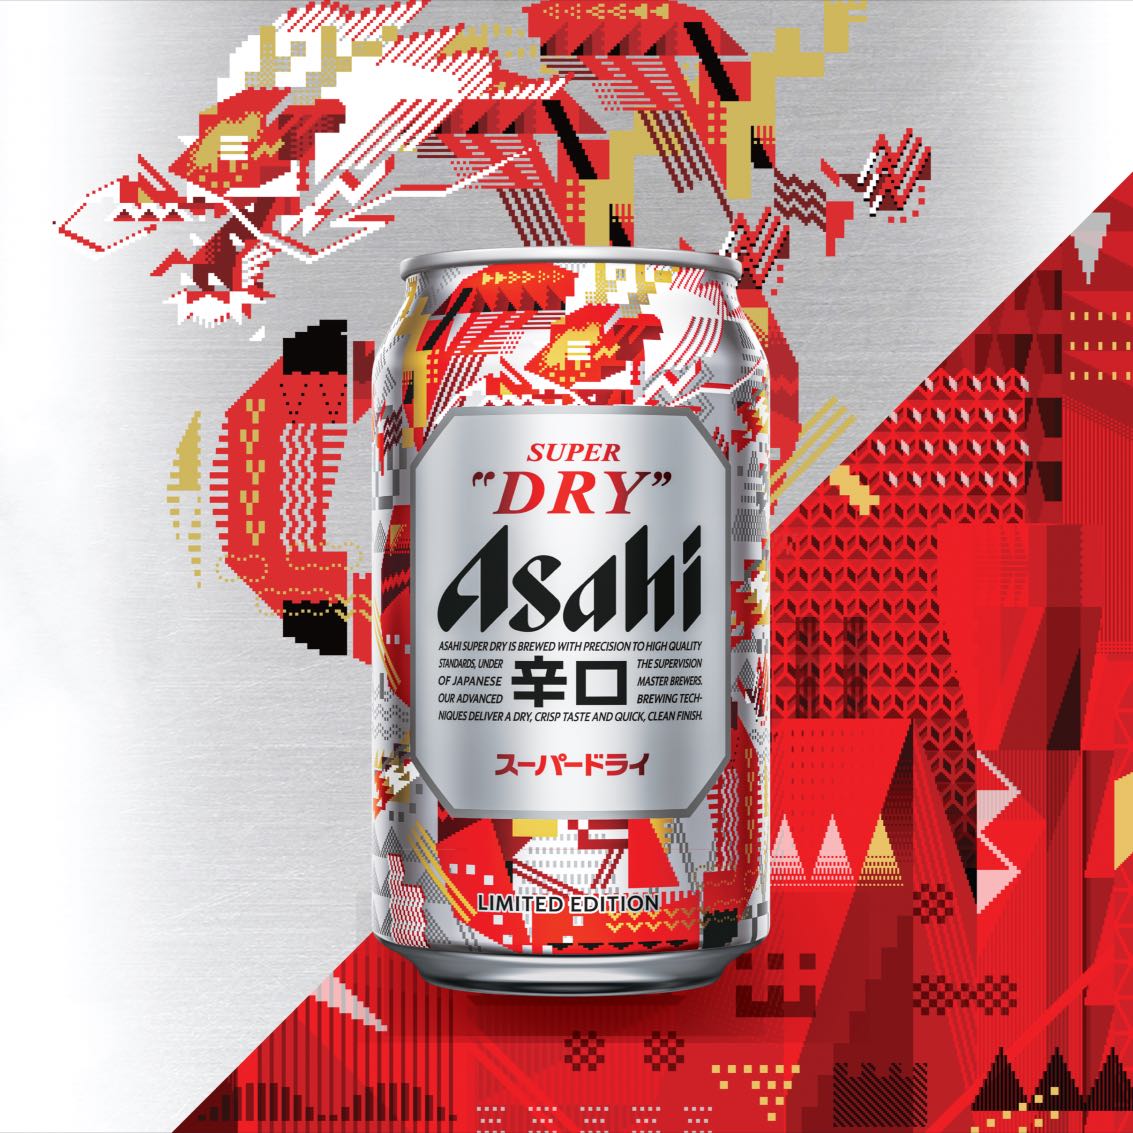 , Toast to good fortune with these limited-edition CNY drinks and gift bundles